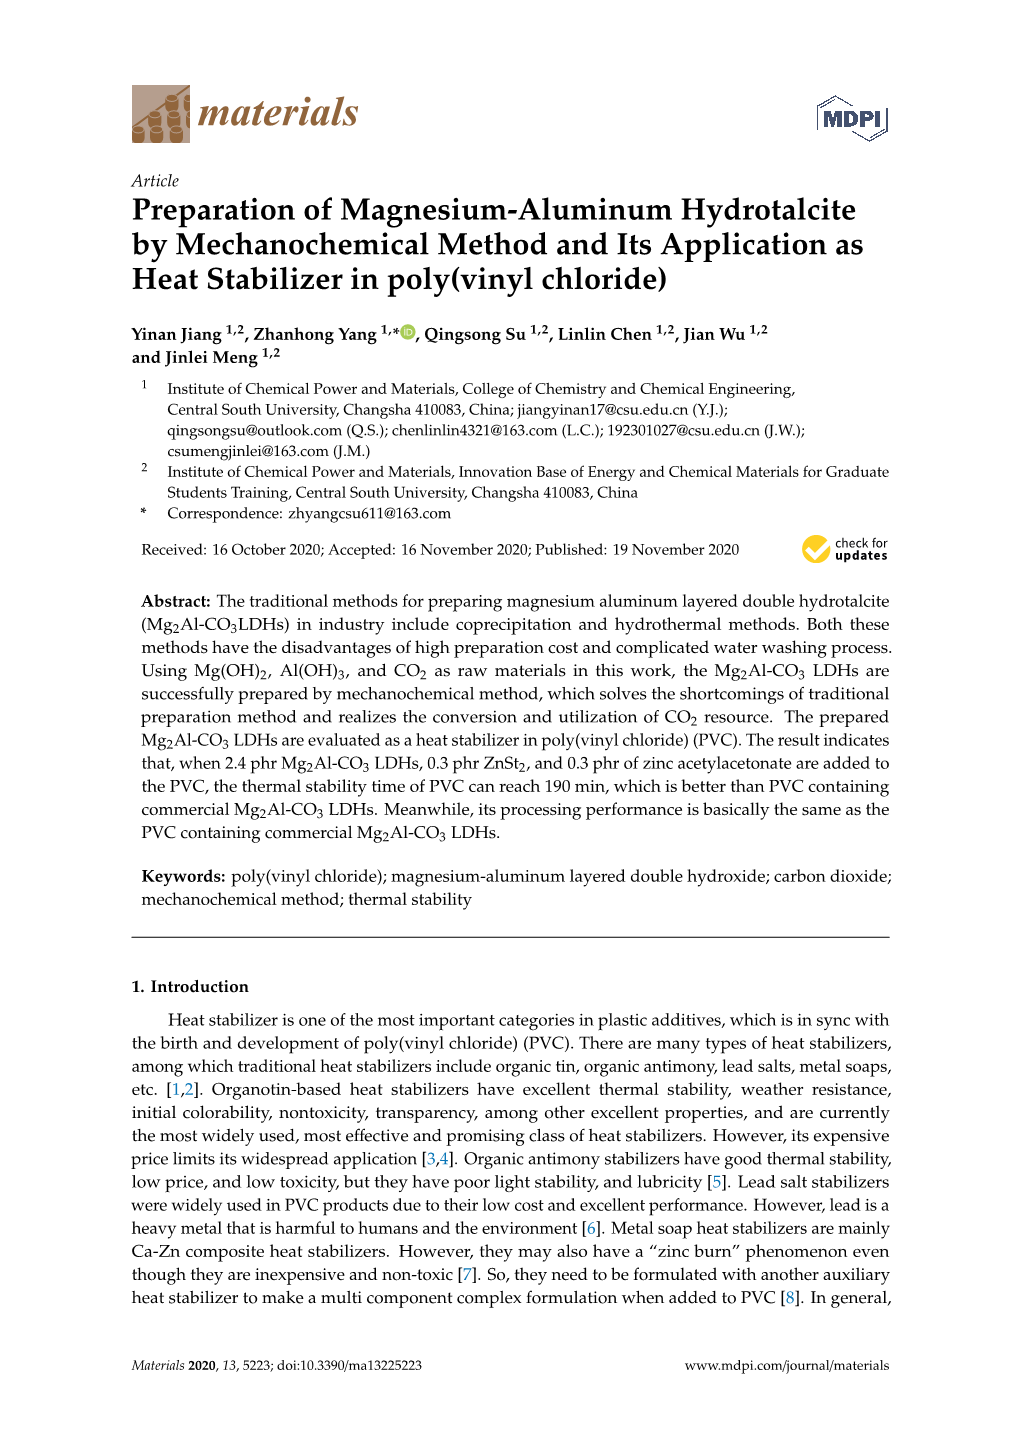 Preparation of Magnesium-Aluminum Hydrotalcite by Mechanochemical Method and Its Application As Heat Stabilizer in Poly(Vinyl Chloride)